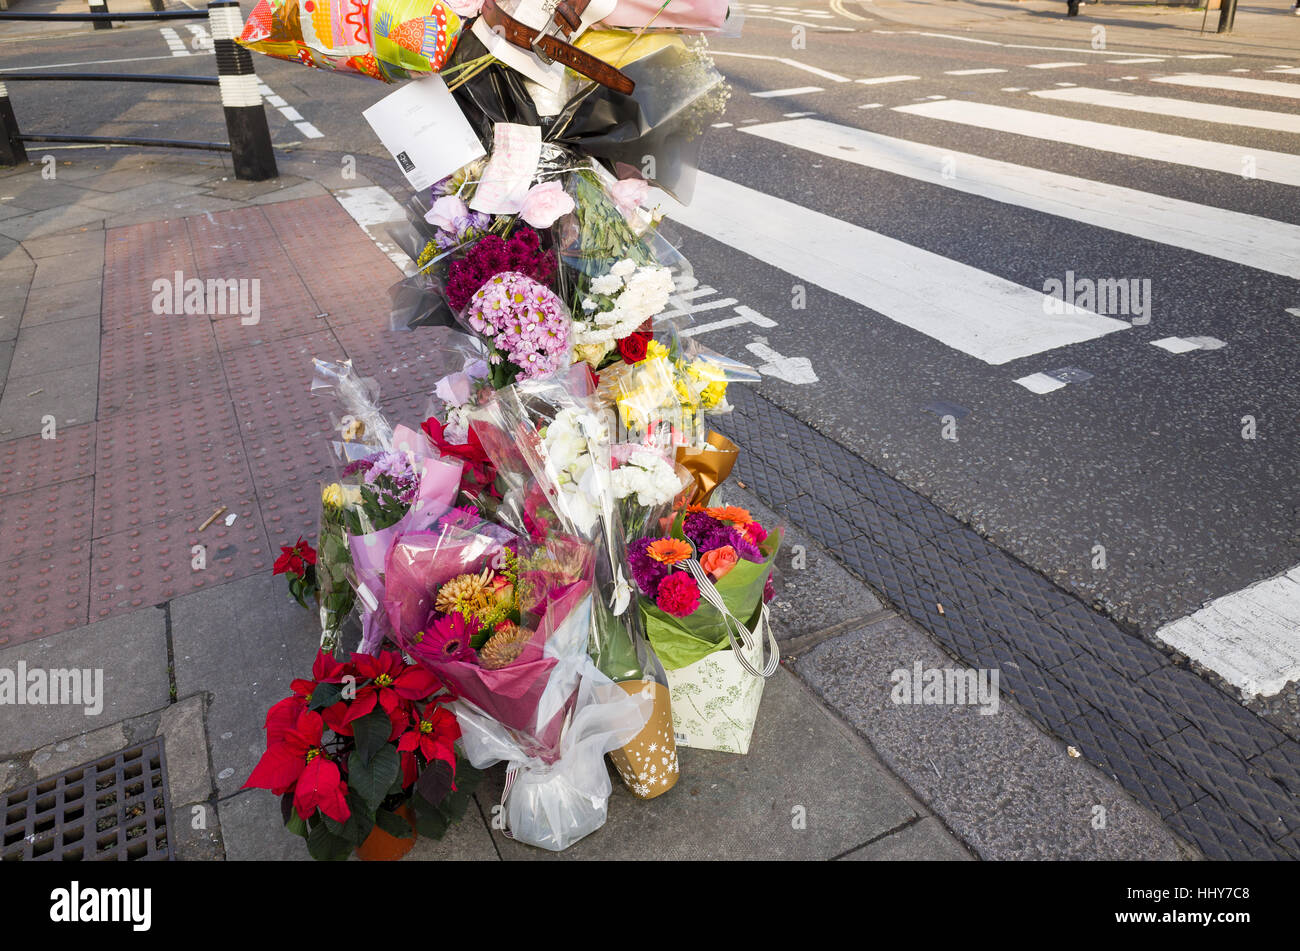 Bouquets of flowers left at the point where a teenager was killed in a road traffic accident, London, England, UK Stock Photo